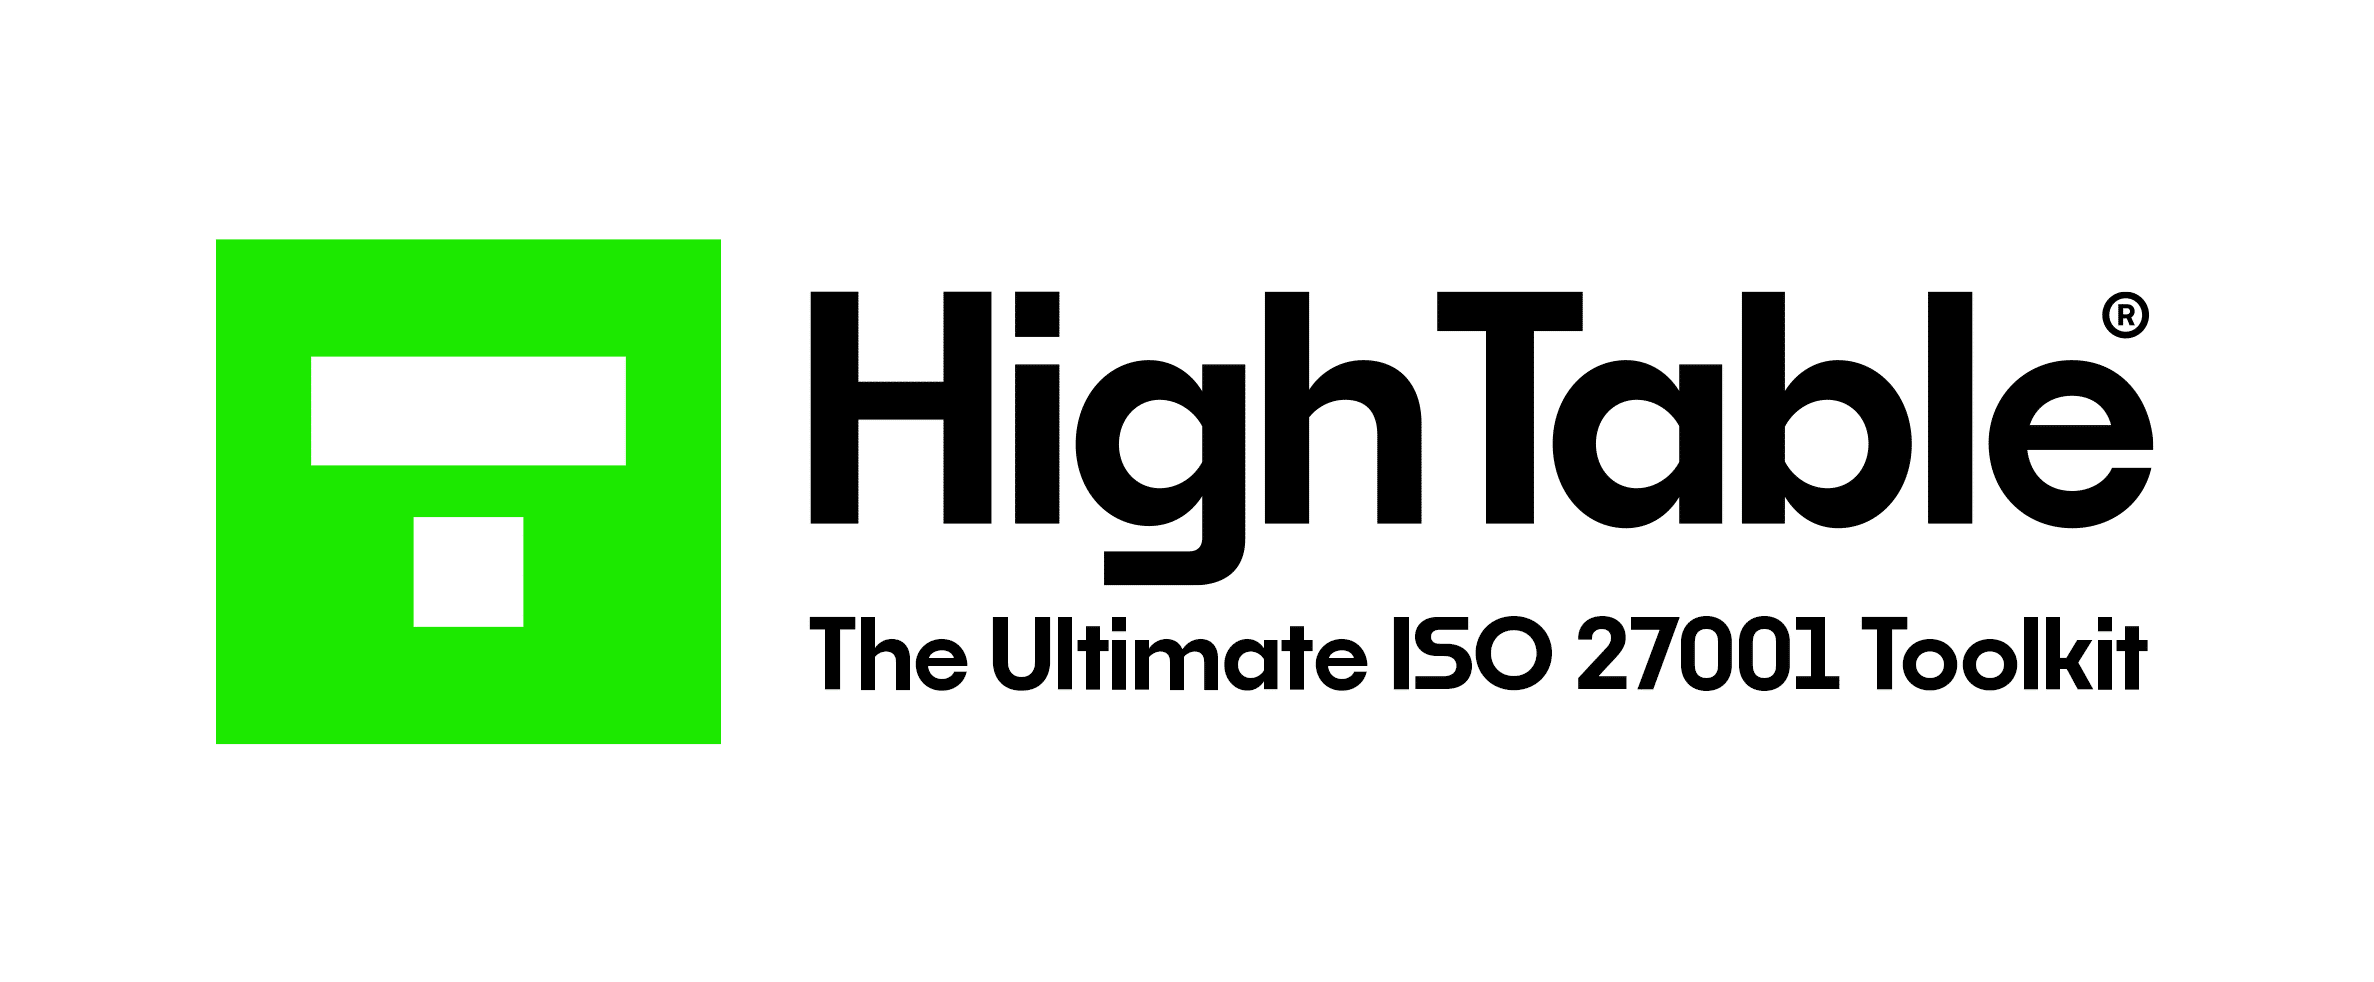 HTHigh Table ISO 27001 Toolkit Logo